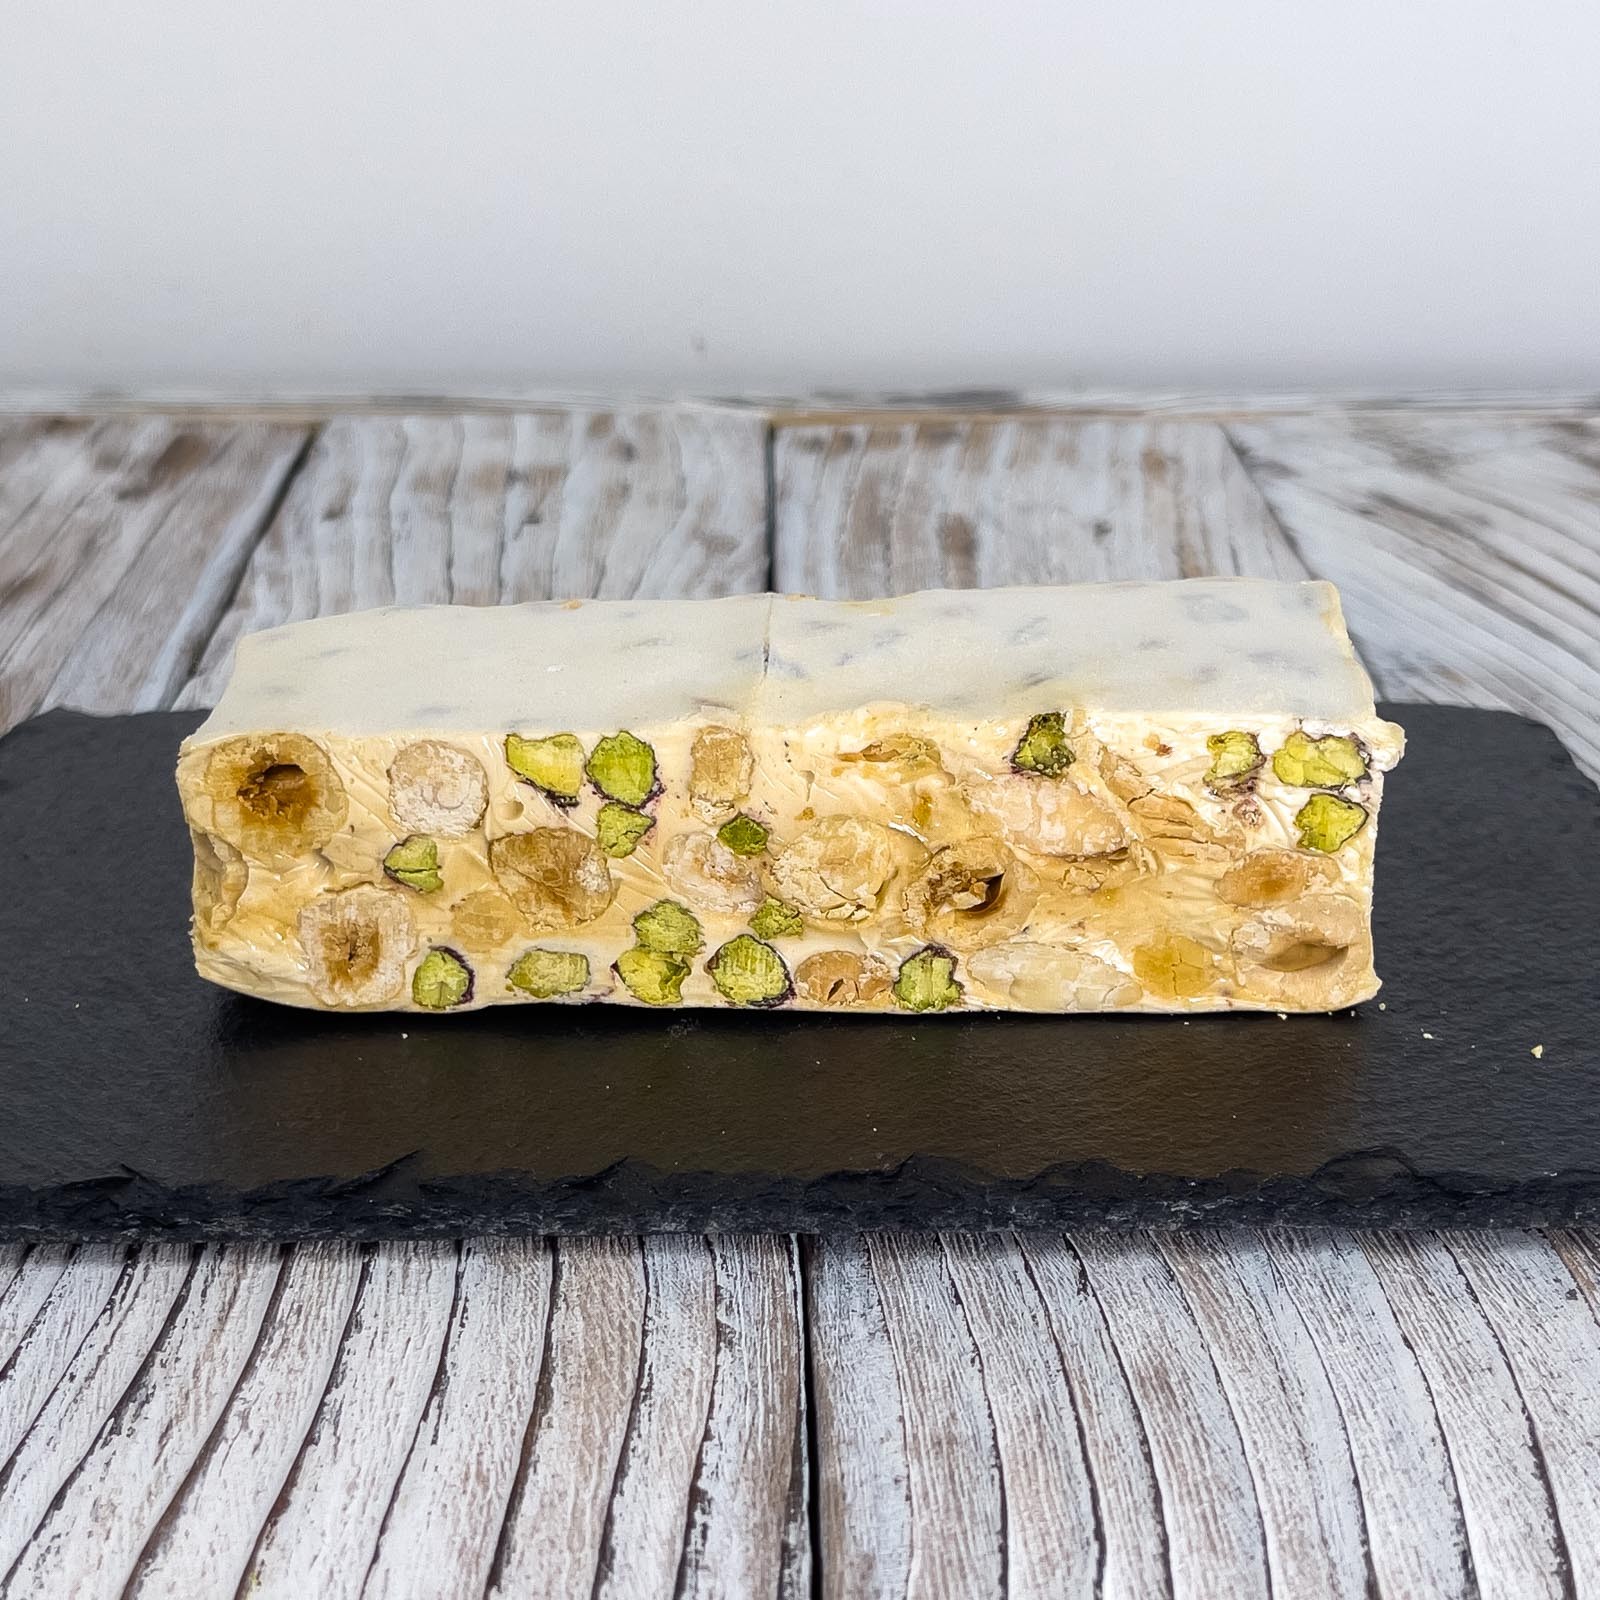 “Torrone” is a typical Christmas dessert, made from egg white, honey and sugar, almonds and with the addition of pistachios and hazelnuts.